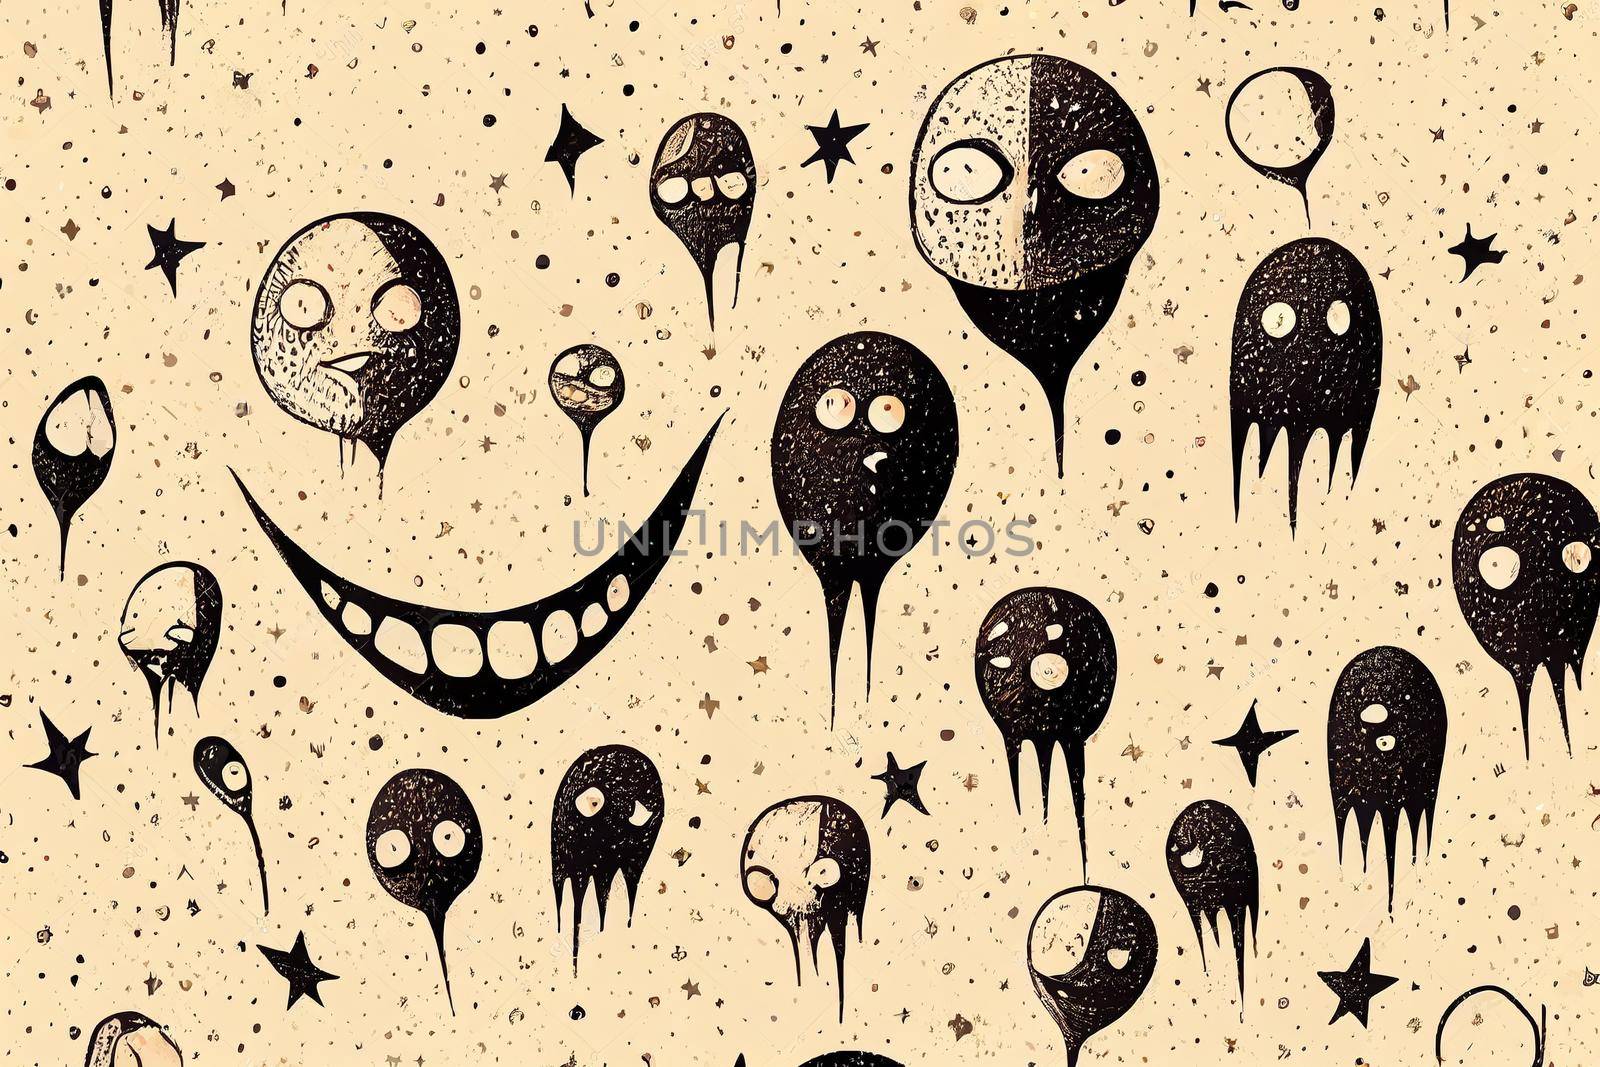 Funny cartoon emotions faces seamless pattern, Happy smiler monsters repeat print, Grunge brush trace track and stars endless ornament, painting, illustration, drawing v2